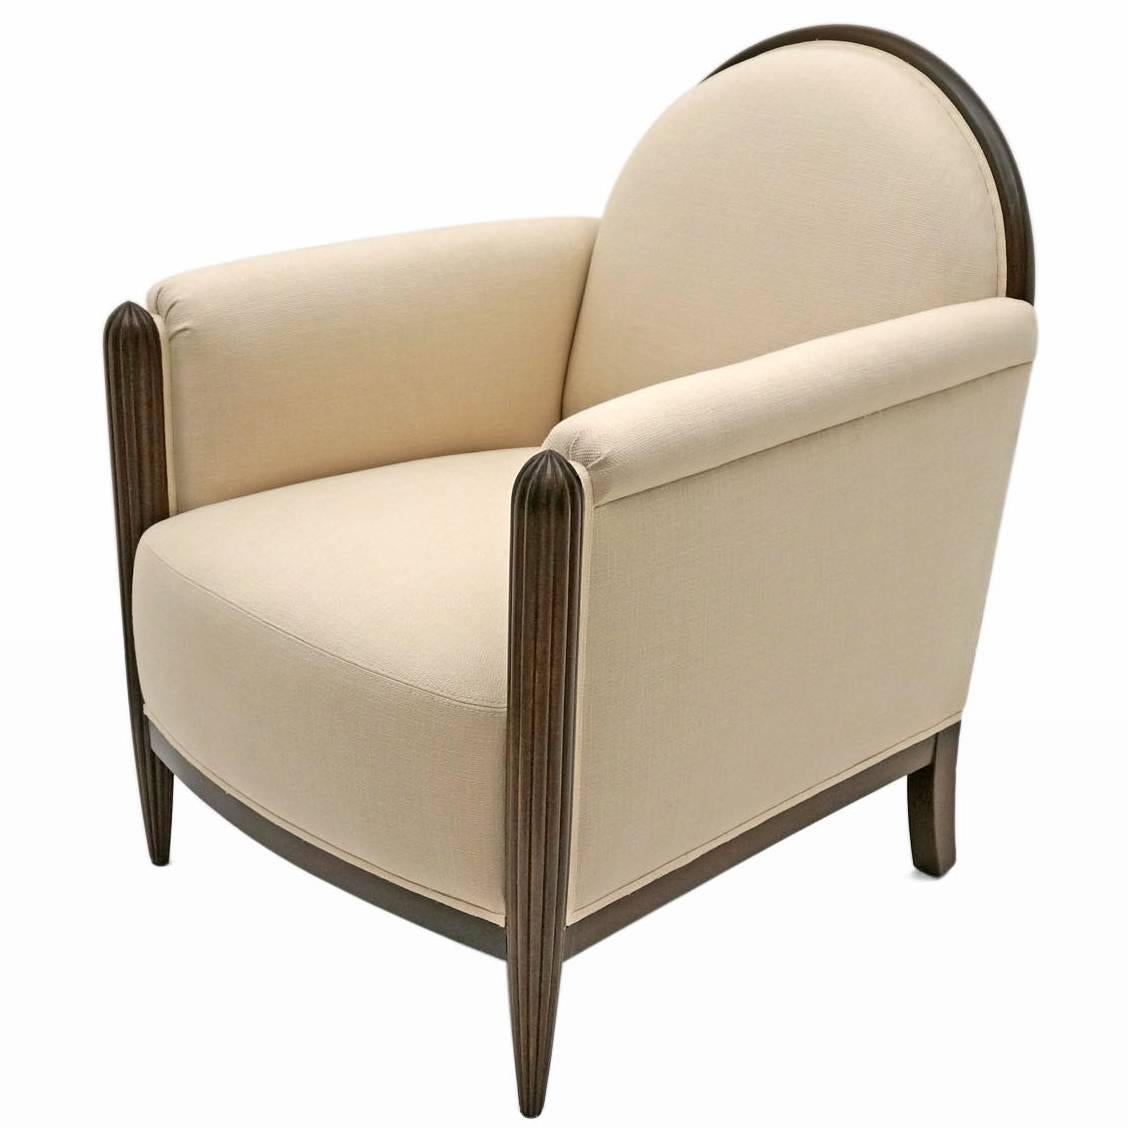 French Art Deco Upholstered Club Chair with Reeded Front Legs, circa 1930